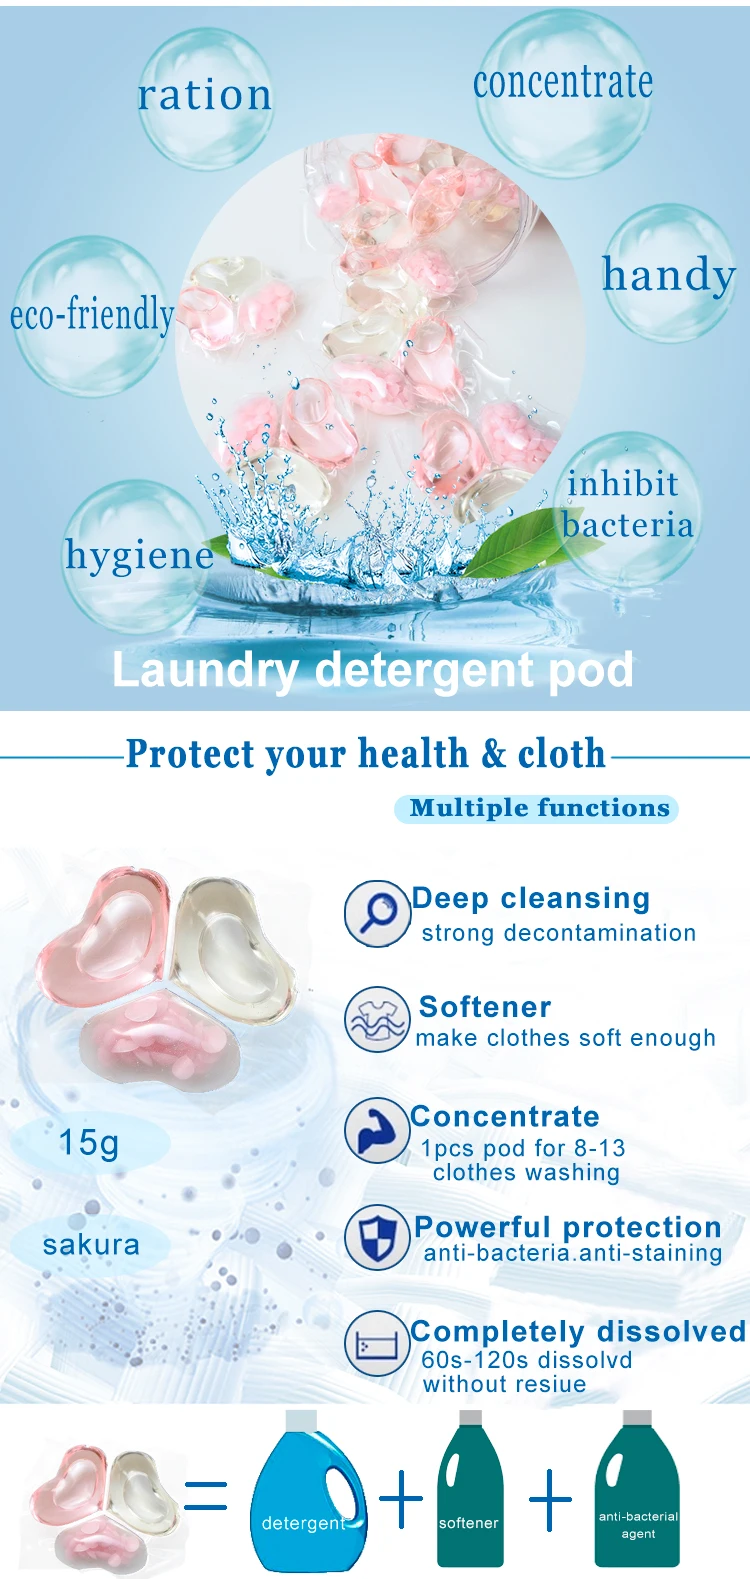 15g laundry detergent packaging natural products 8X the Cleaning Power laundry pod products